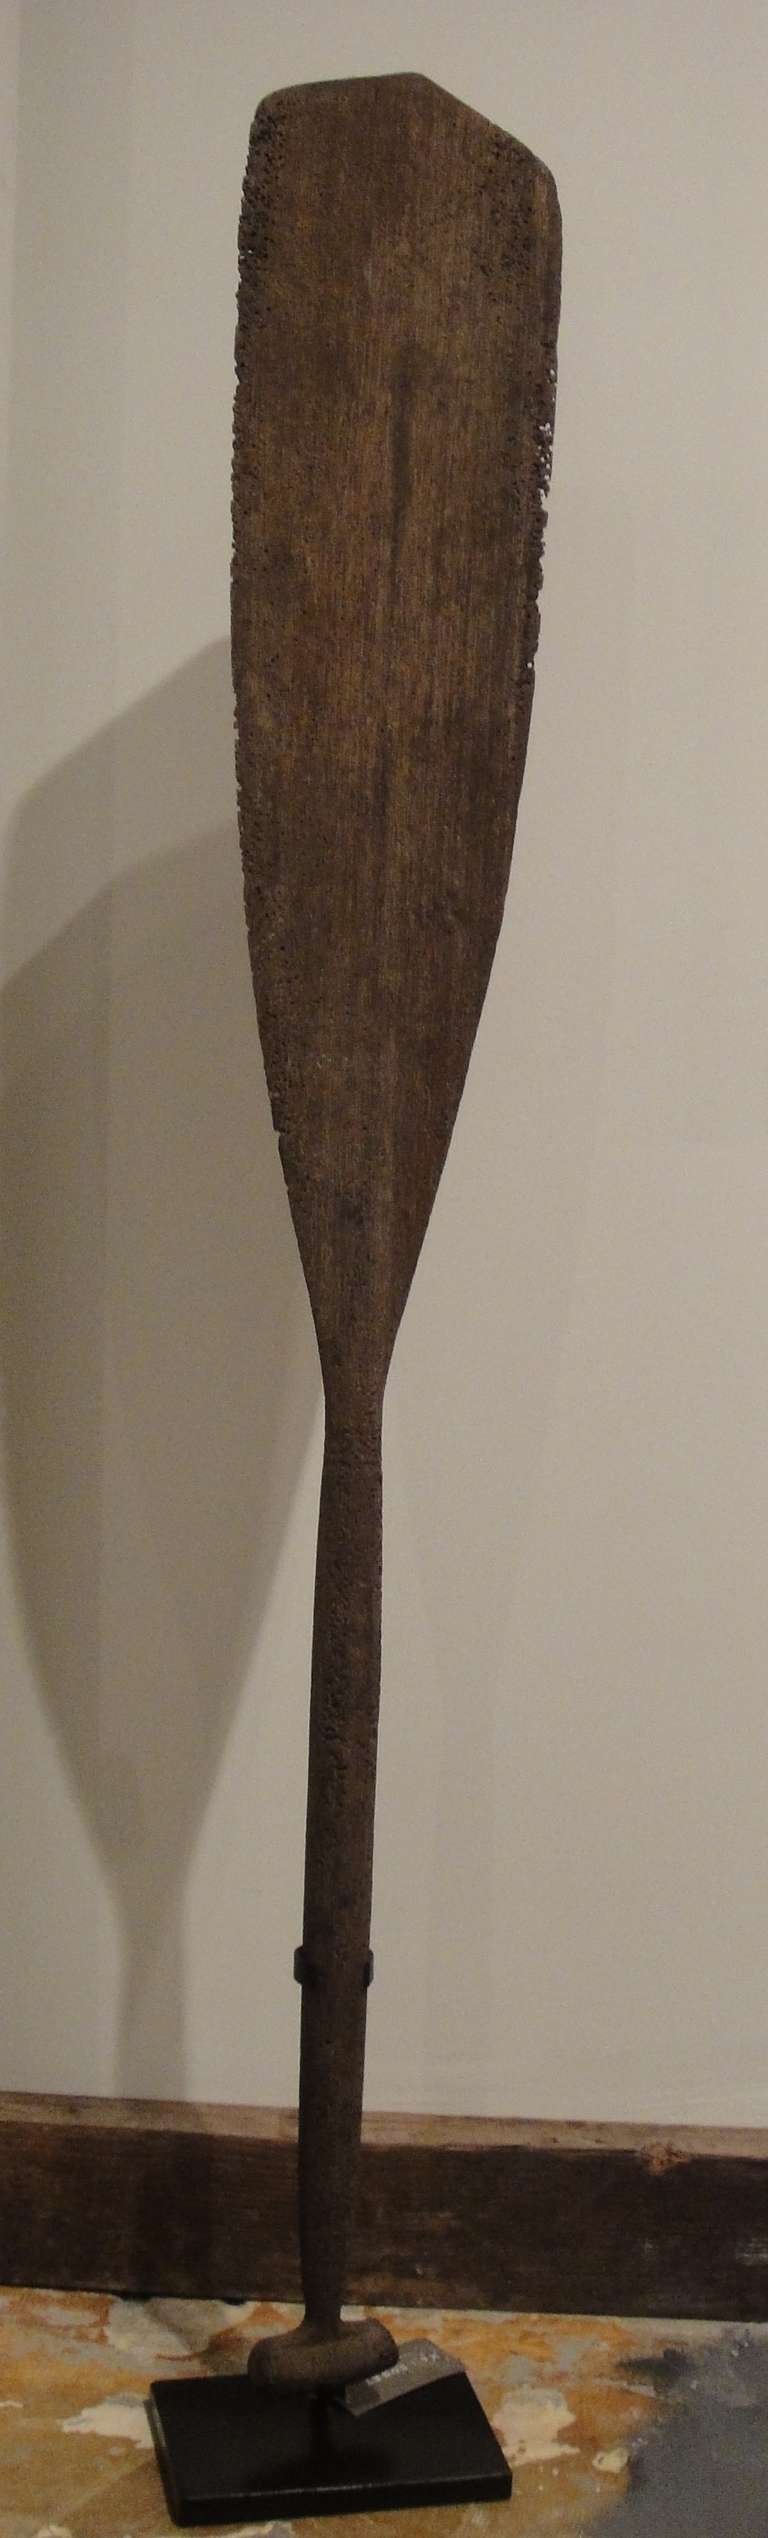 This vintage oar on stand was reclaimed from the ocean. Found in Indonesia, probably originally made in the early 20th century from iron wood.